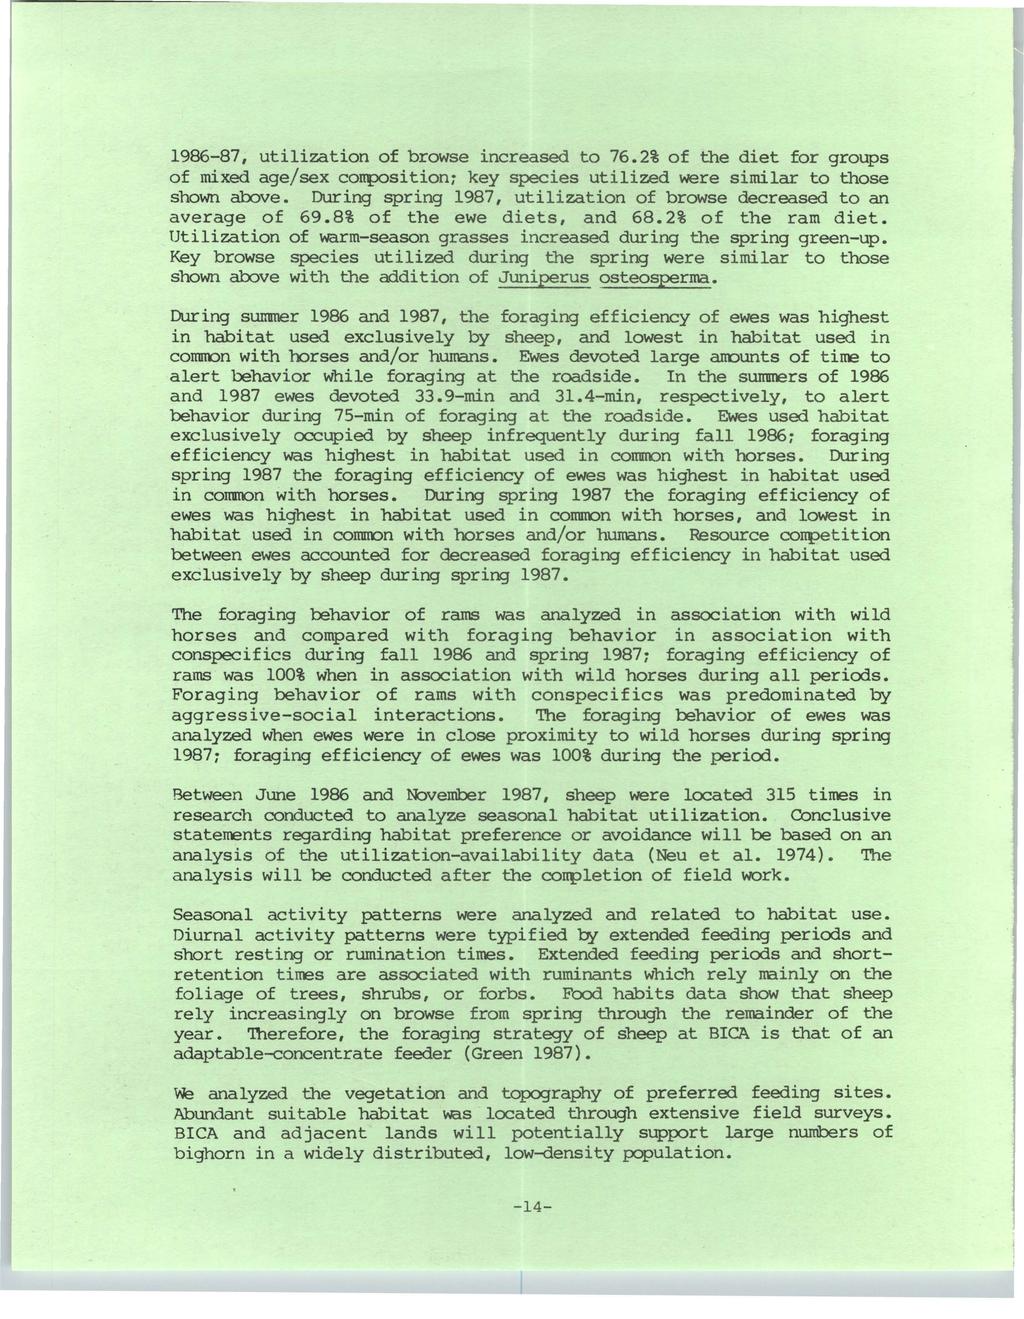 University of Wyoming National Park Service Research Center Annual Report, Vol. 11 [1987], Art. 3 1986-87, utilization of browse increased to 76.